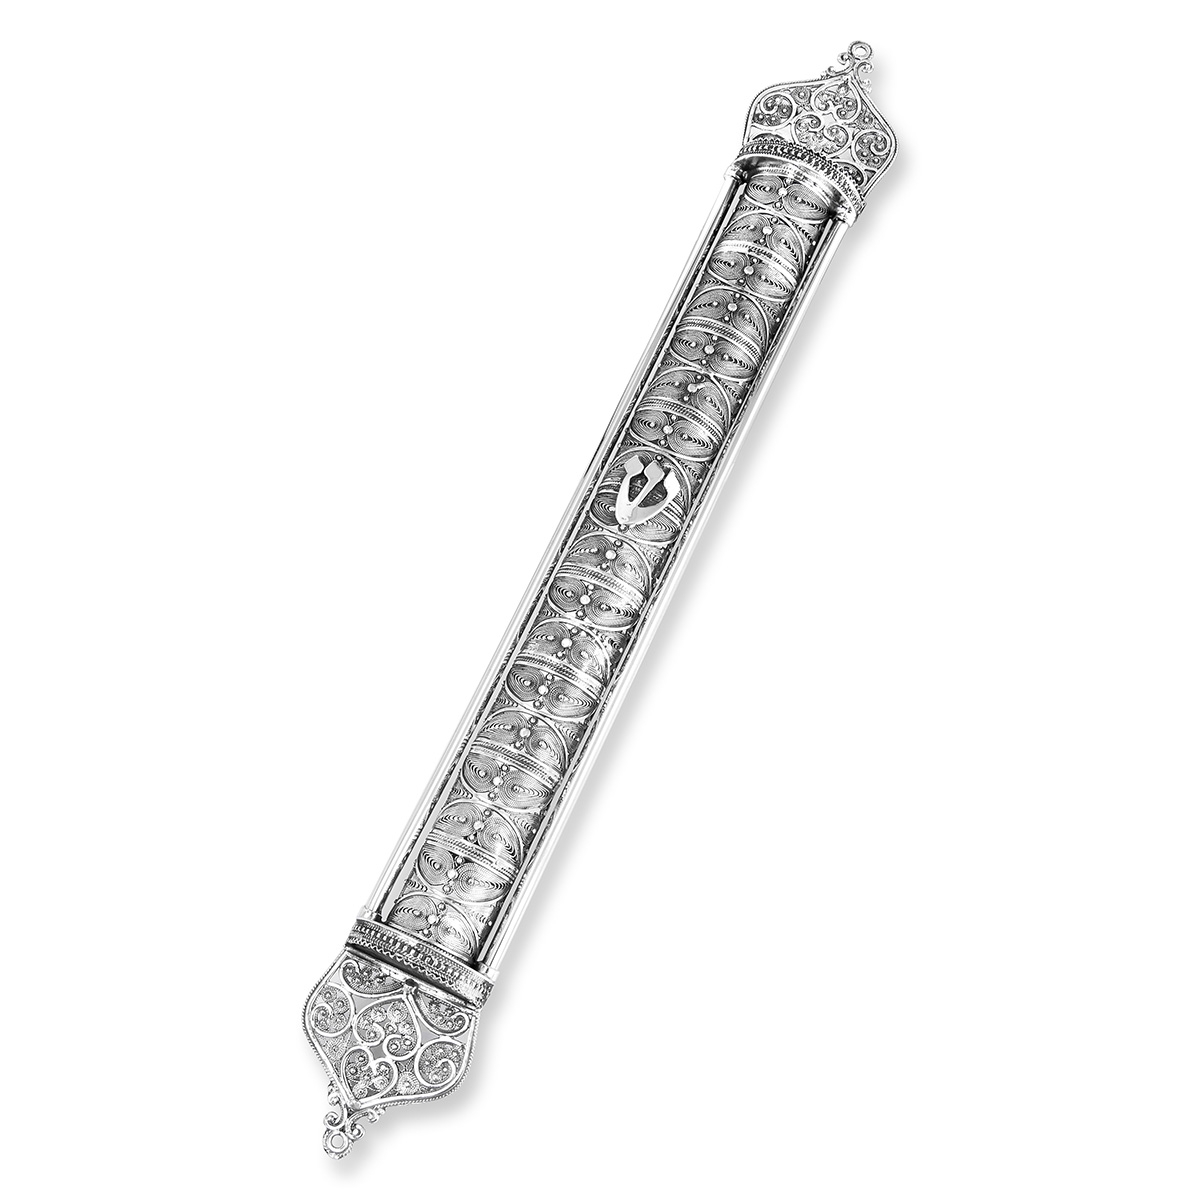 Traditional Yemenite Art Grand Handcrafted Sterling Silver Extra Large Mezuzah Case With Ornate Design - 1